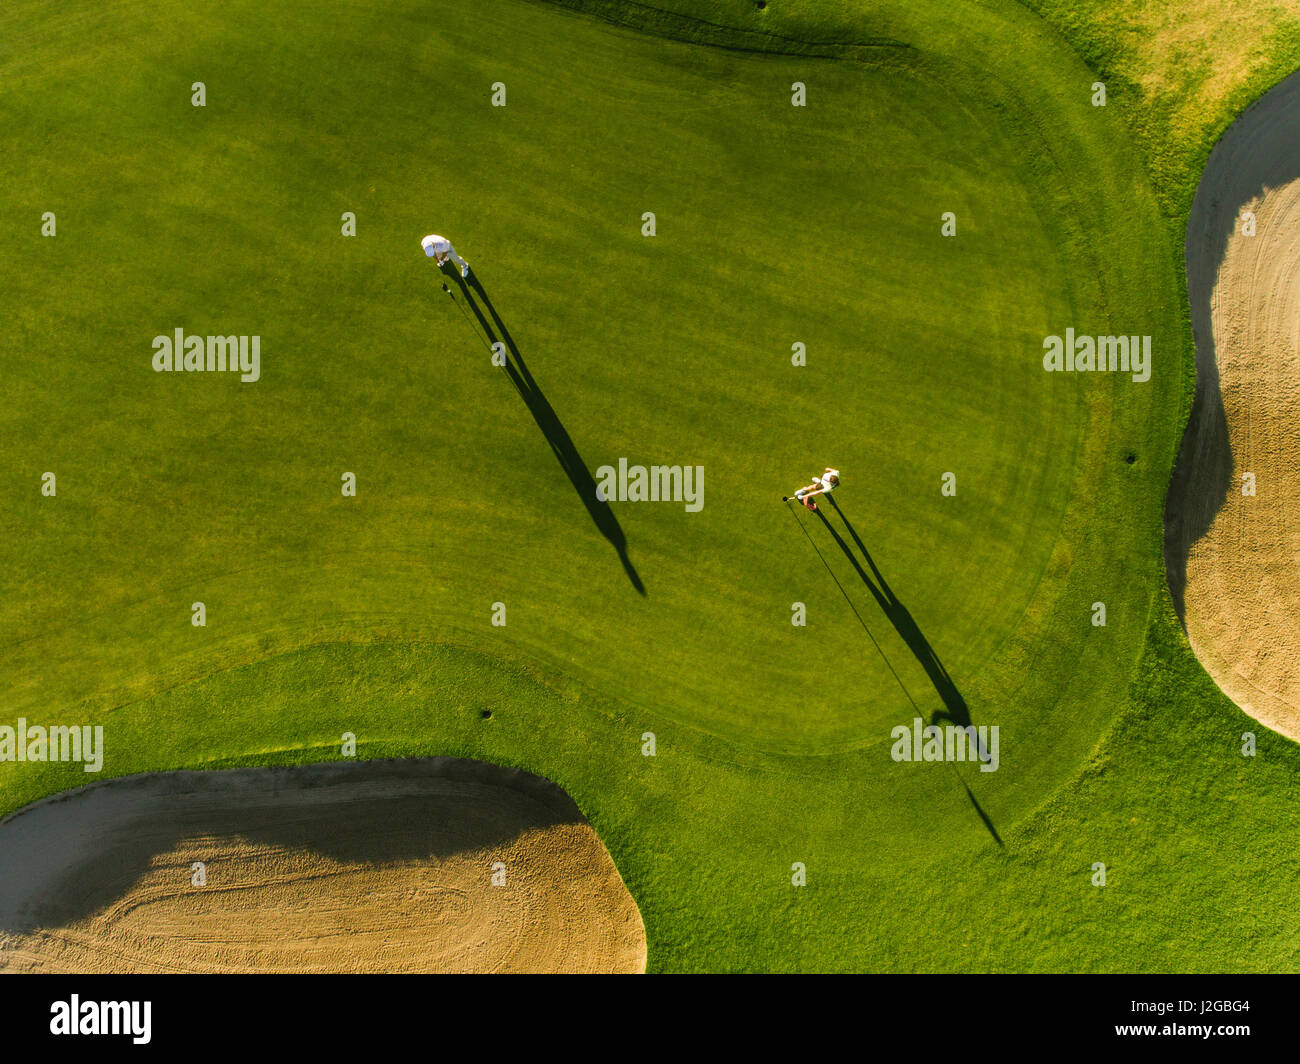 Aerial view of professional golfers playing on putting green on a summer day. Players on a green golf course. Stock Photo